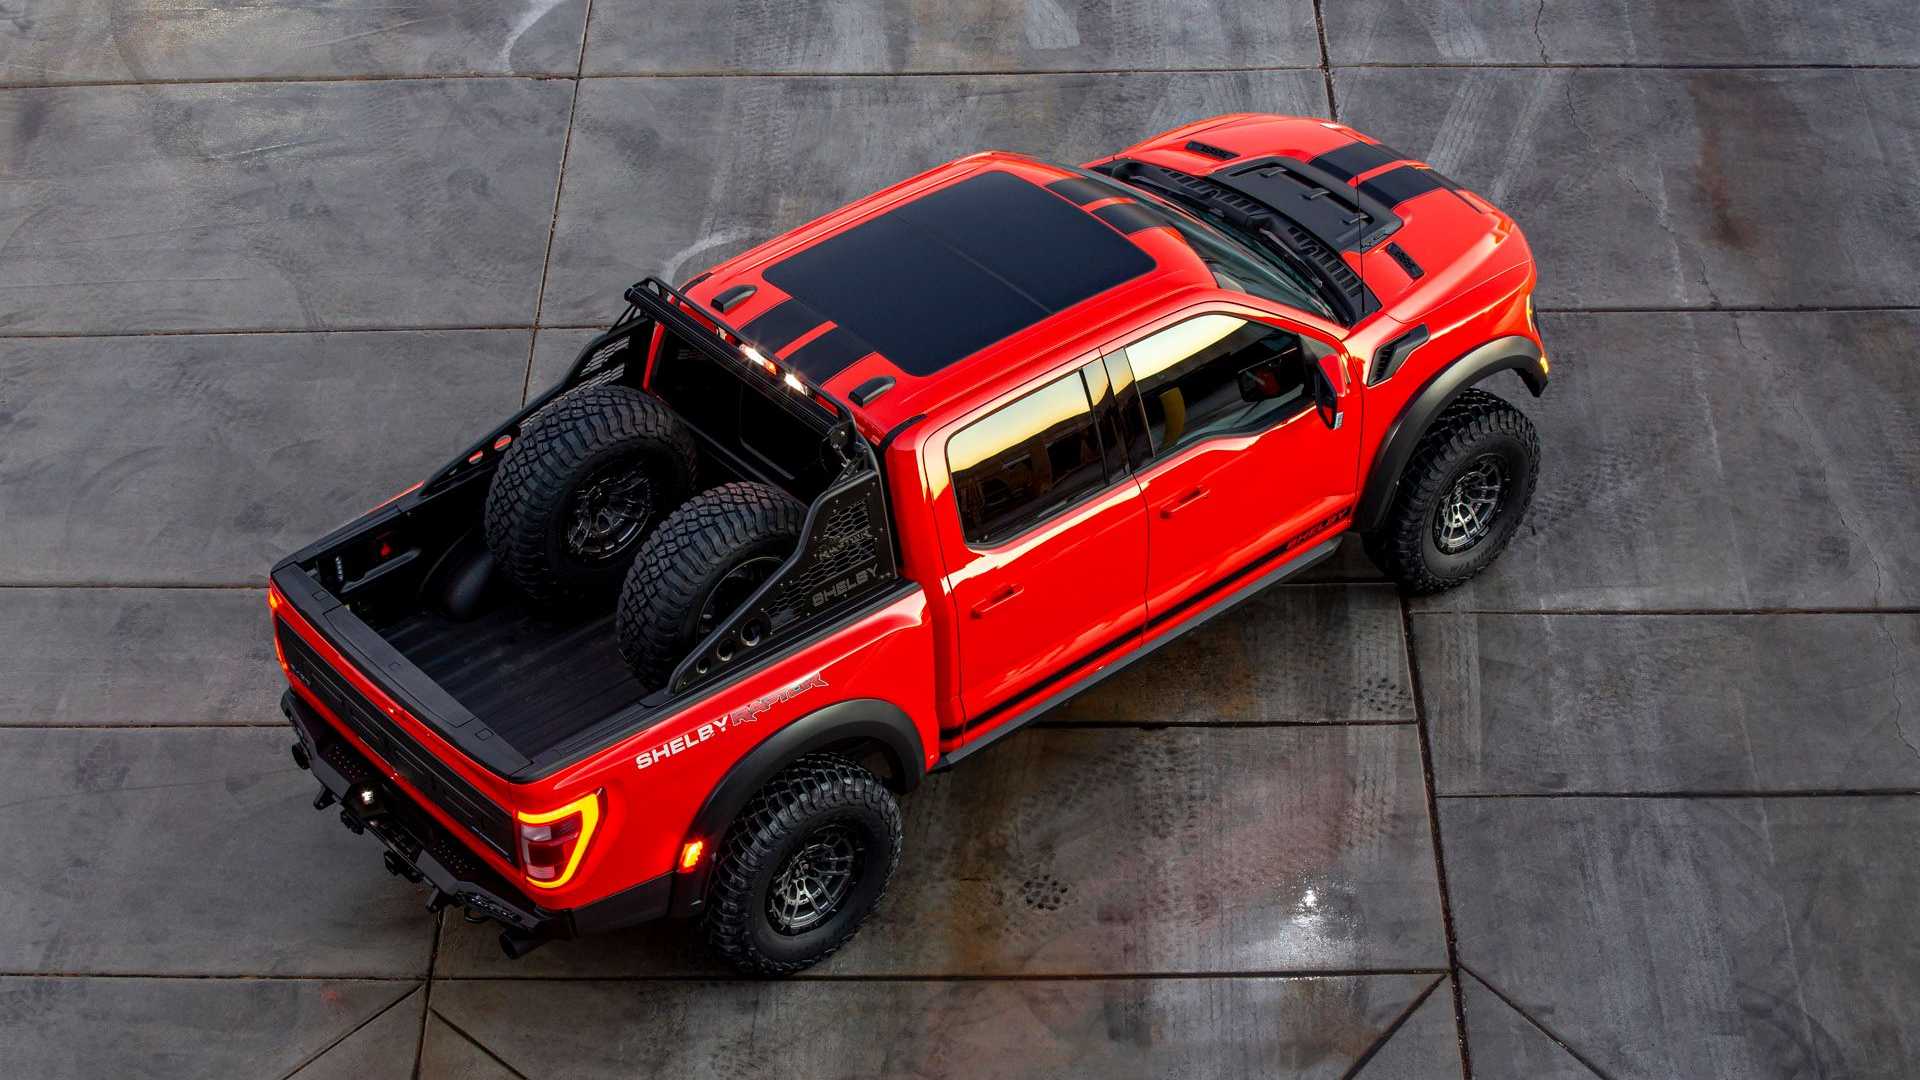 The Shelby American F-150 Raptor is simply monstrous